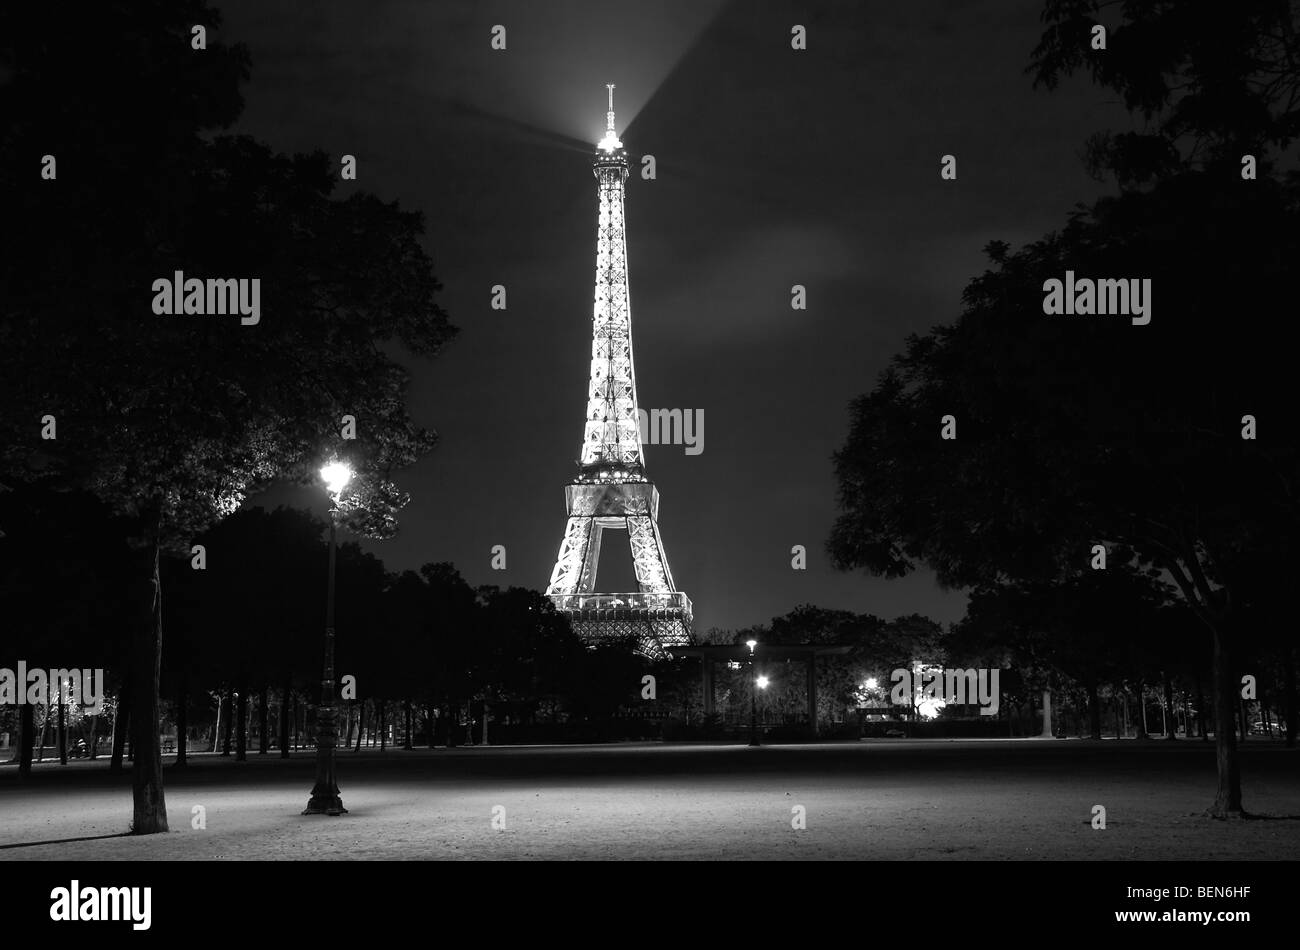 Night image of the Eiffel Tower in Black and White Stock Photo